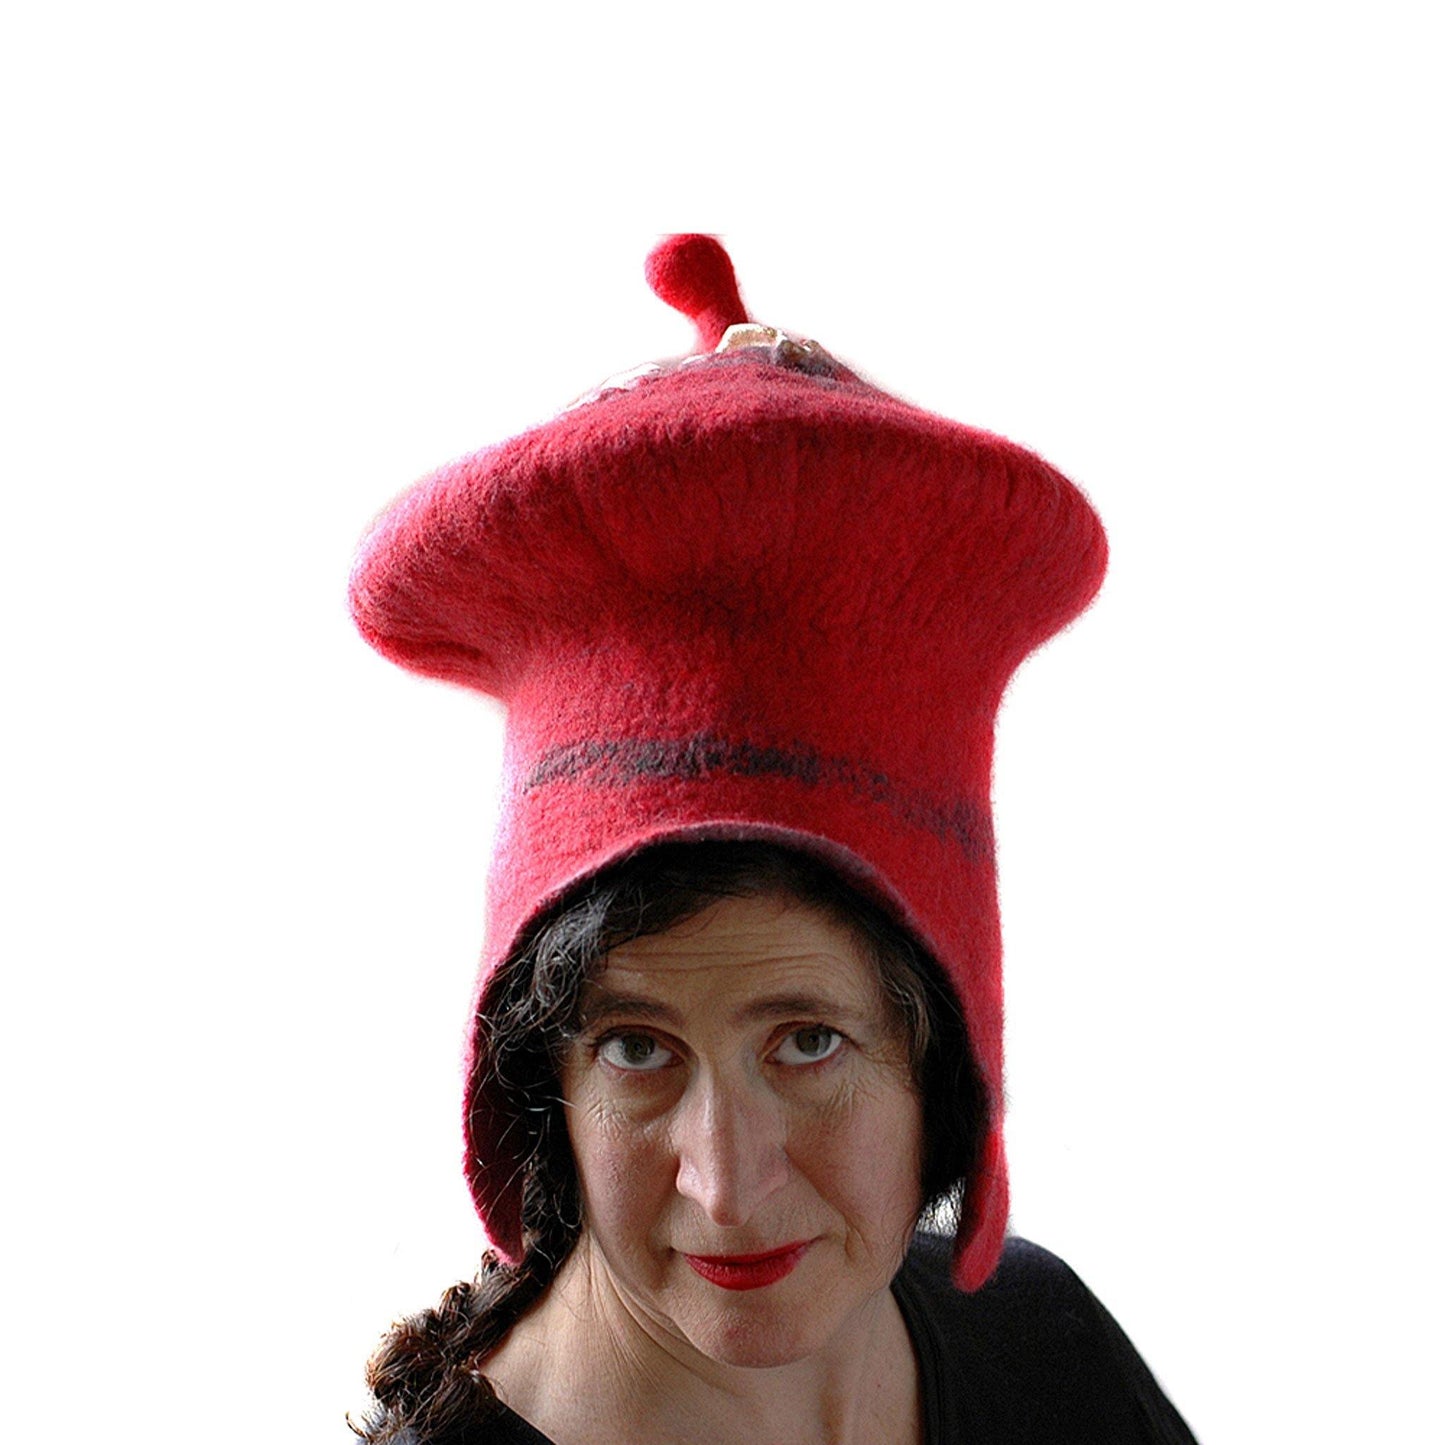 Watermelon Red Sci Fi Mushroom Wizard Hat with Earflaps - front view